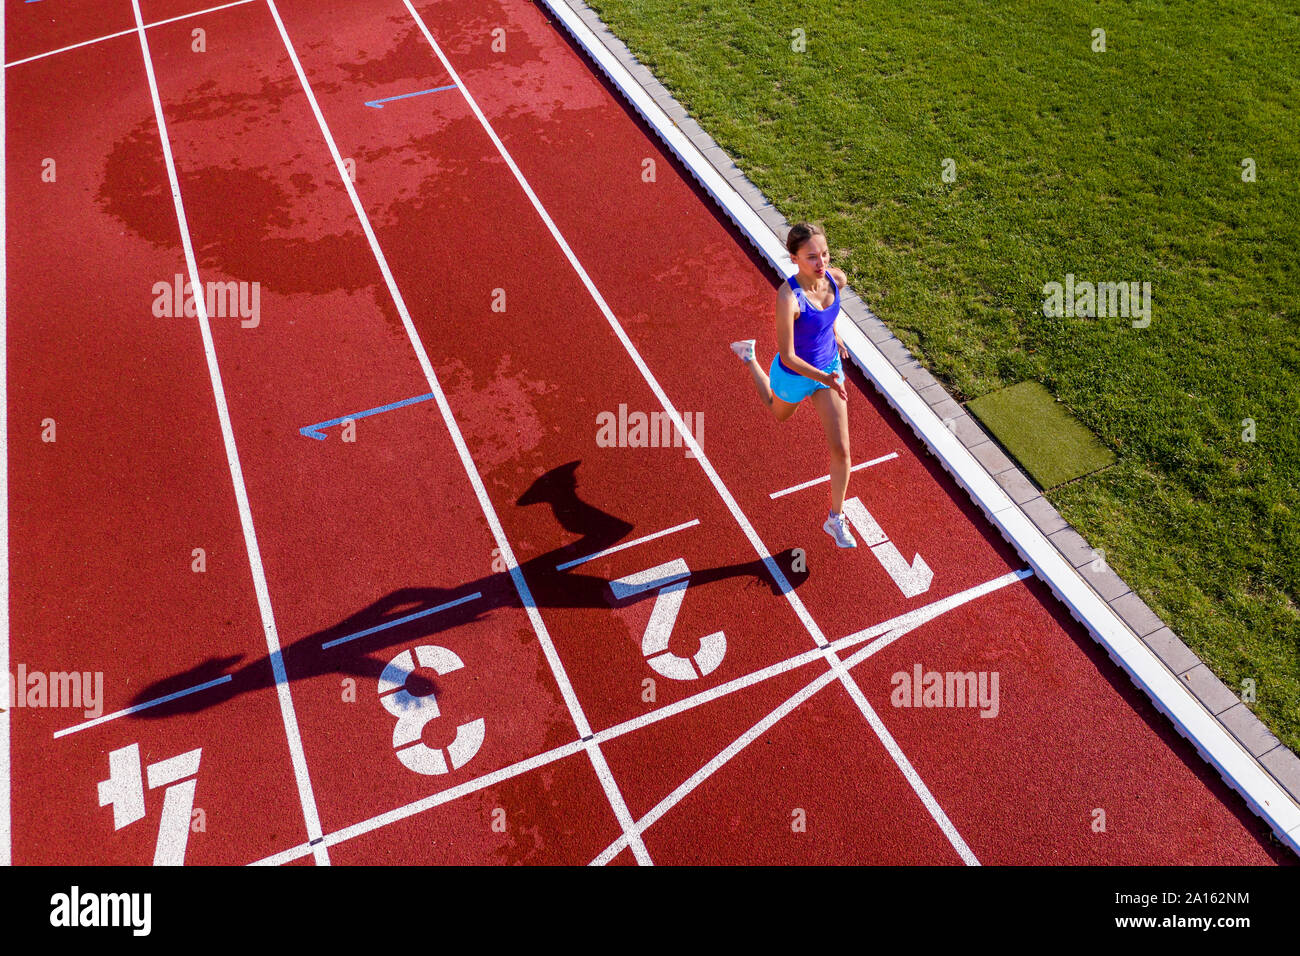 Aerial view of a running young female athlete on a tartan track crossing finishing line Stock Photo